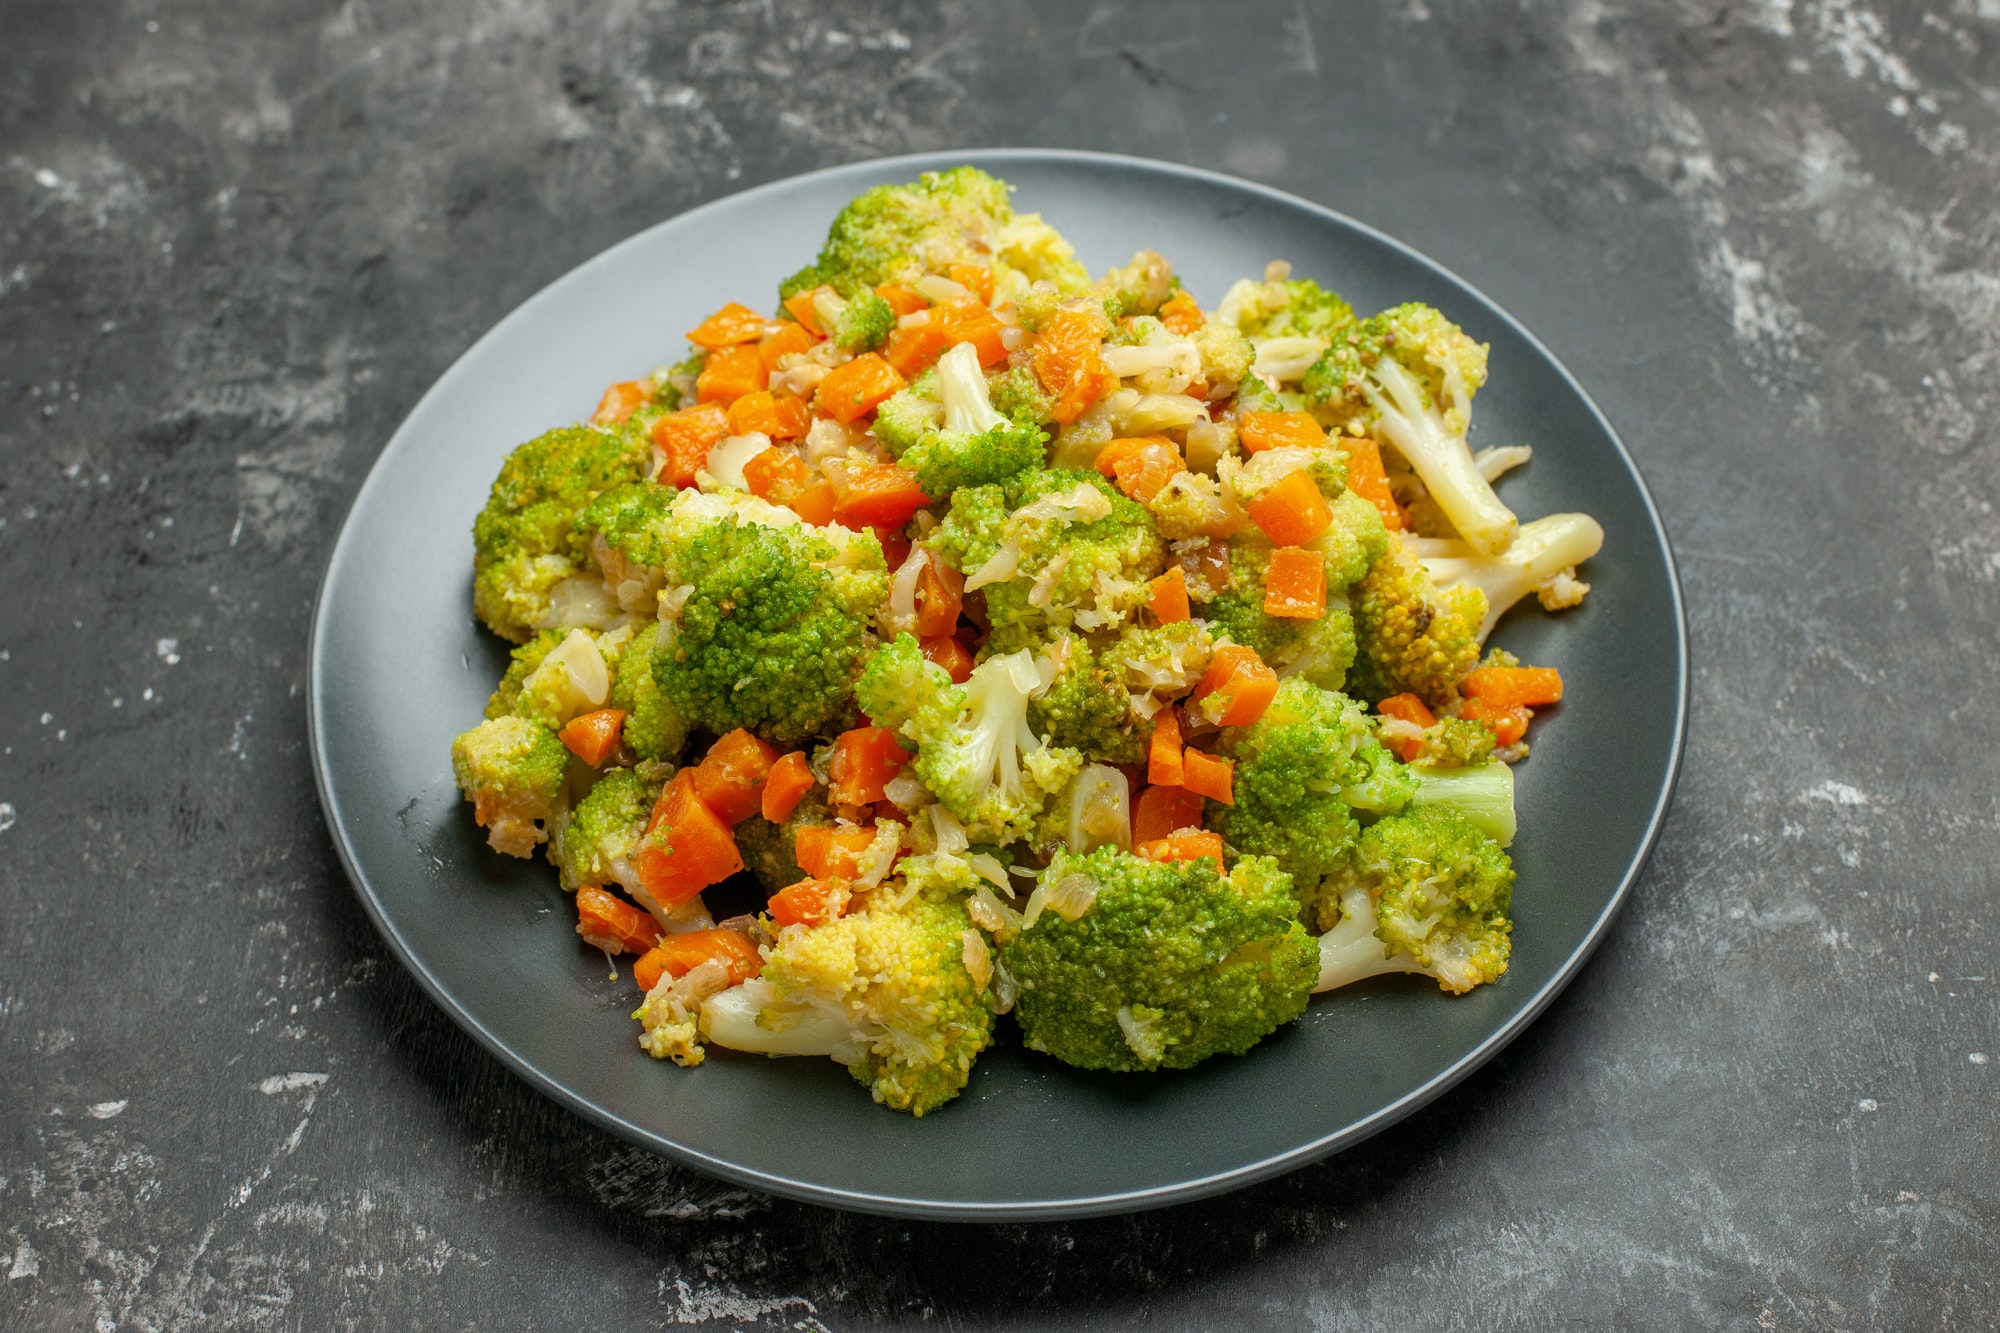 Half shot of healthy meal with brocoli and carrots on a black plate on gray background